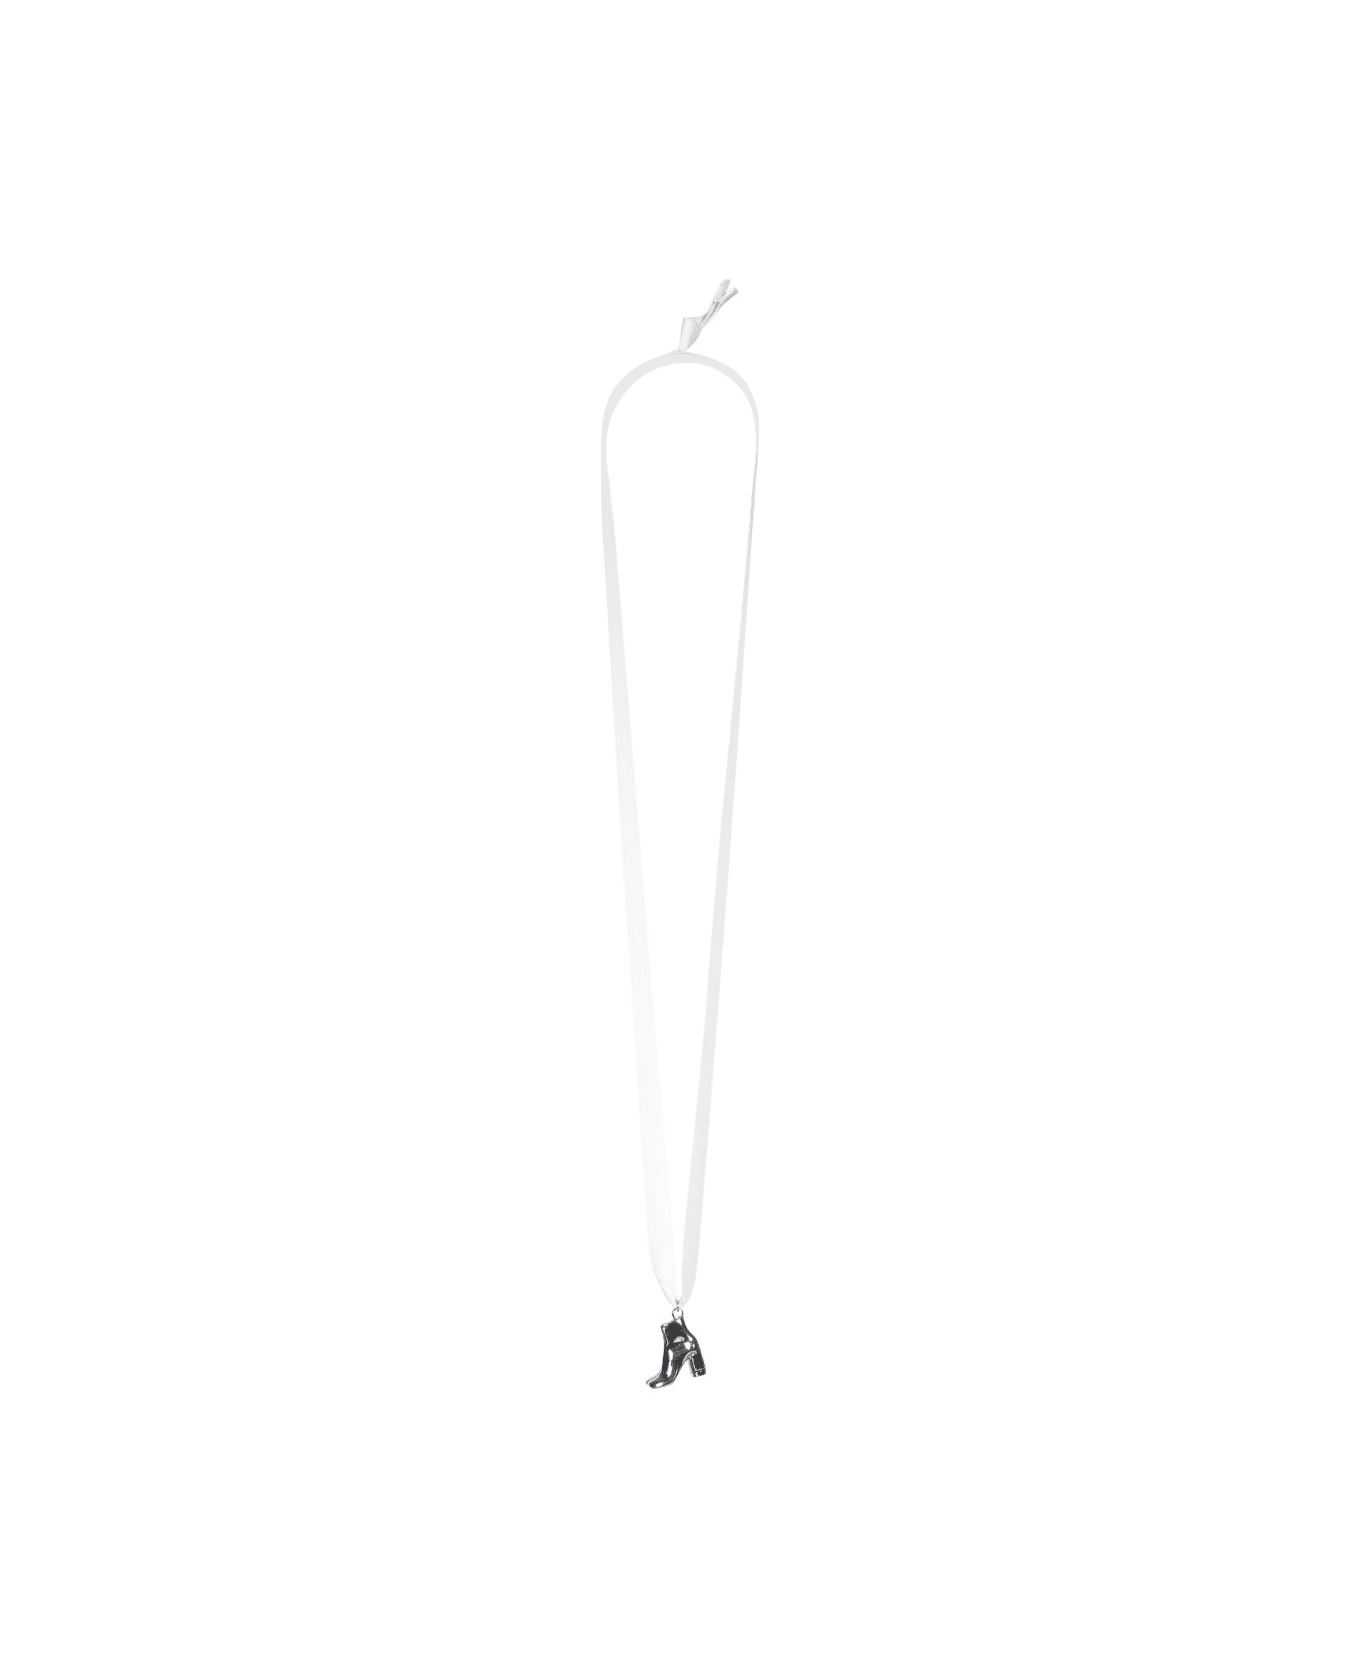 MM6 Maison Margiela Boot Pendant Necklace - SILVER ネックレス